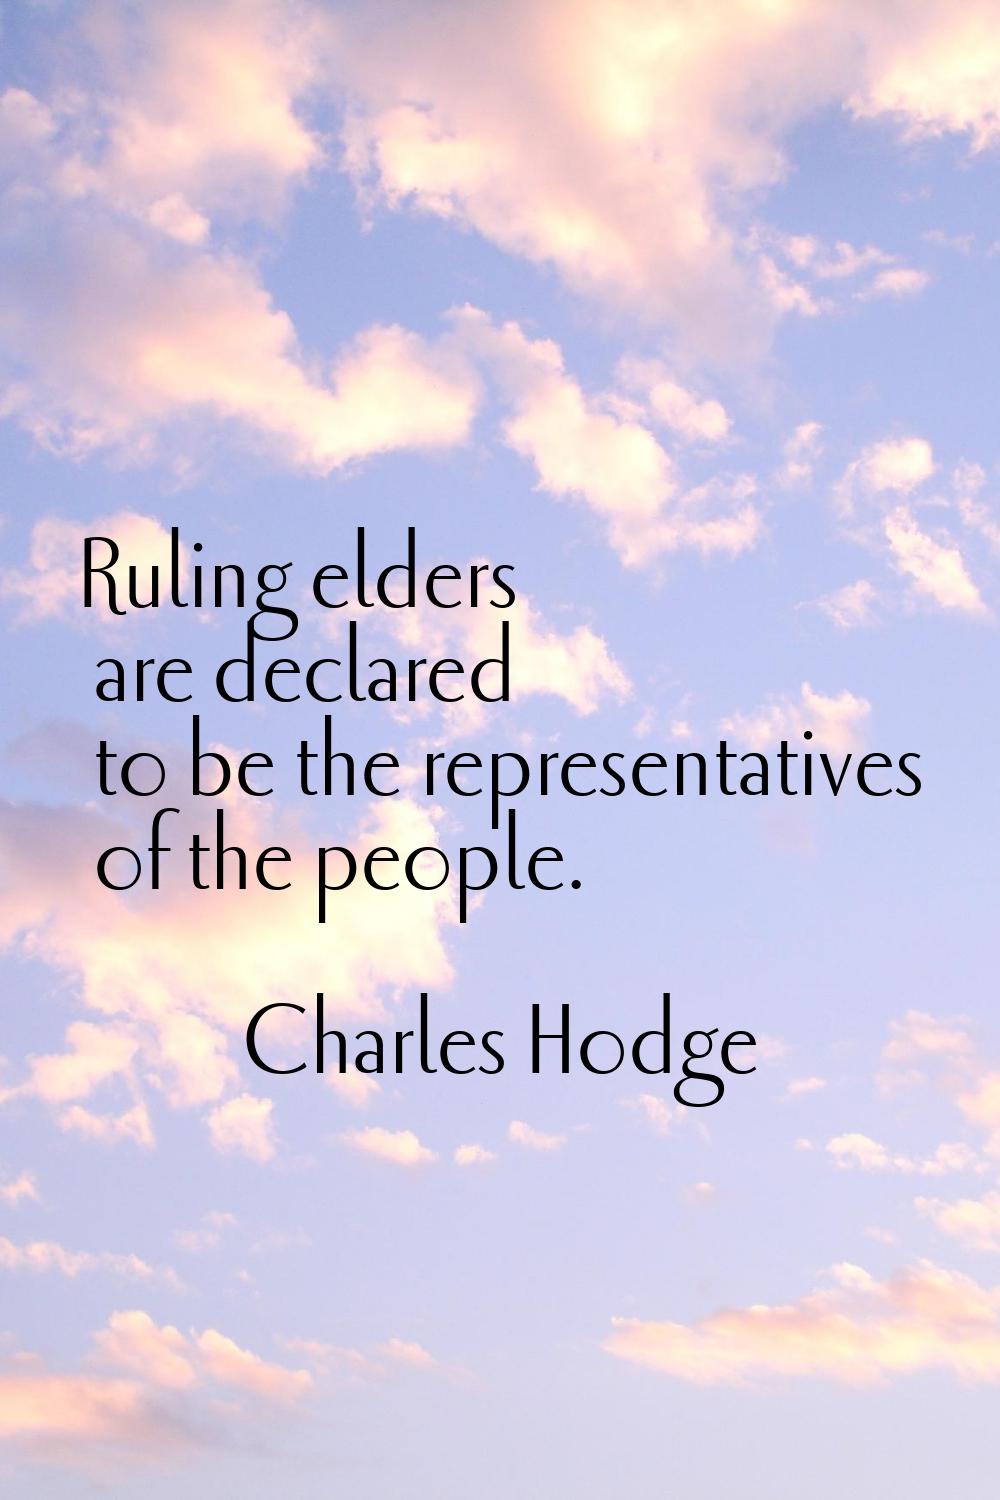 Ruling elders are declared to be the representatives of the people.